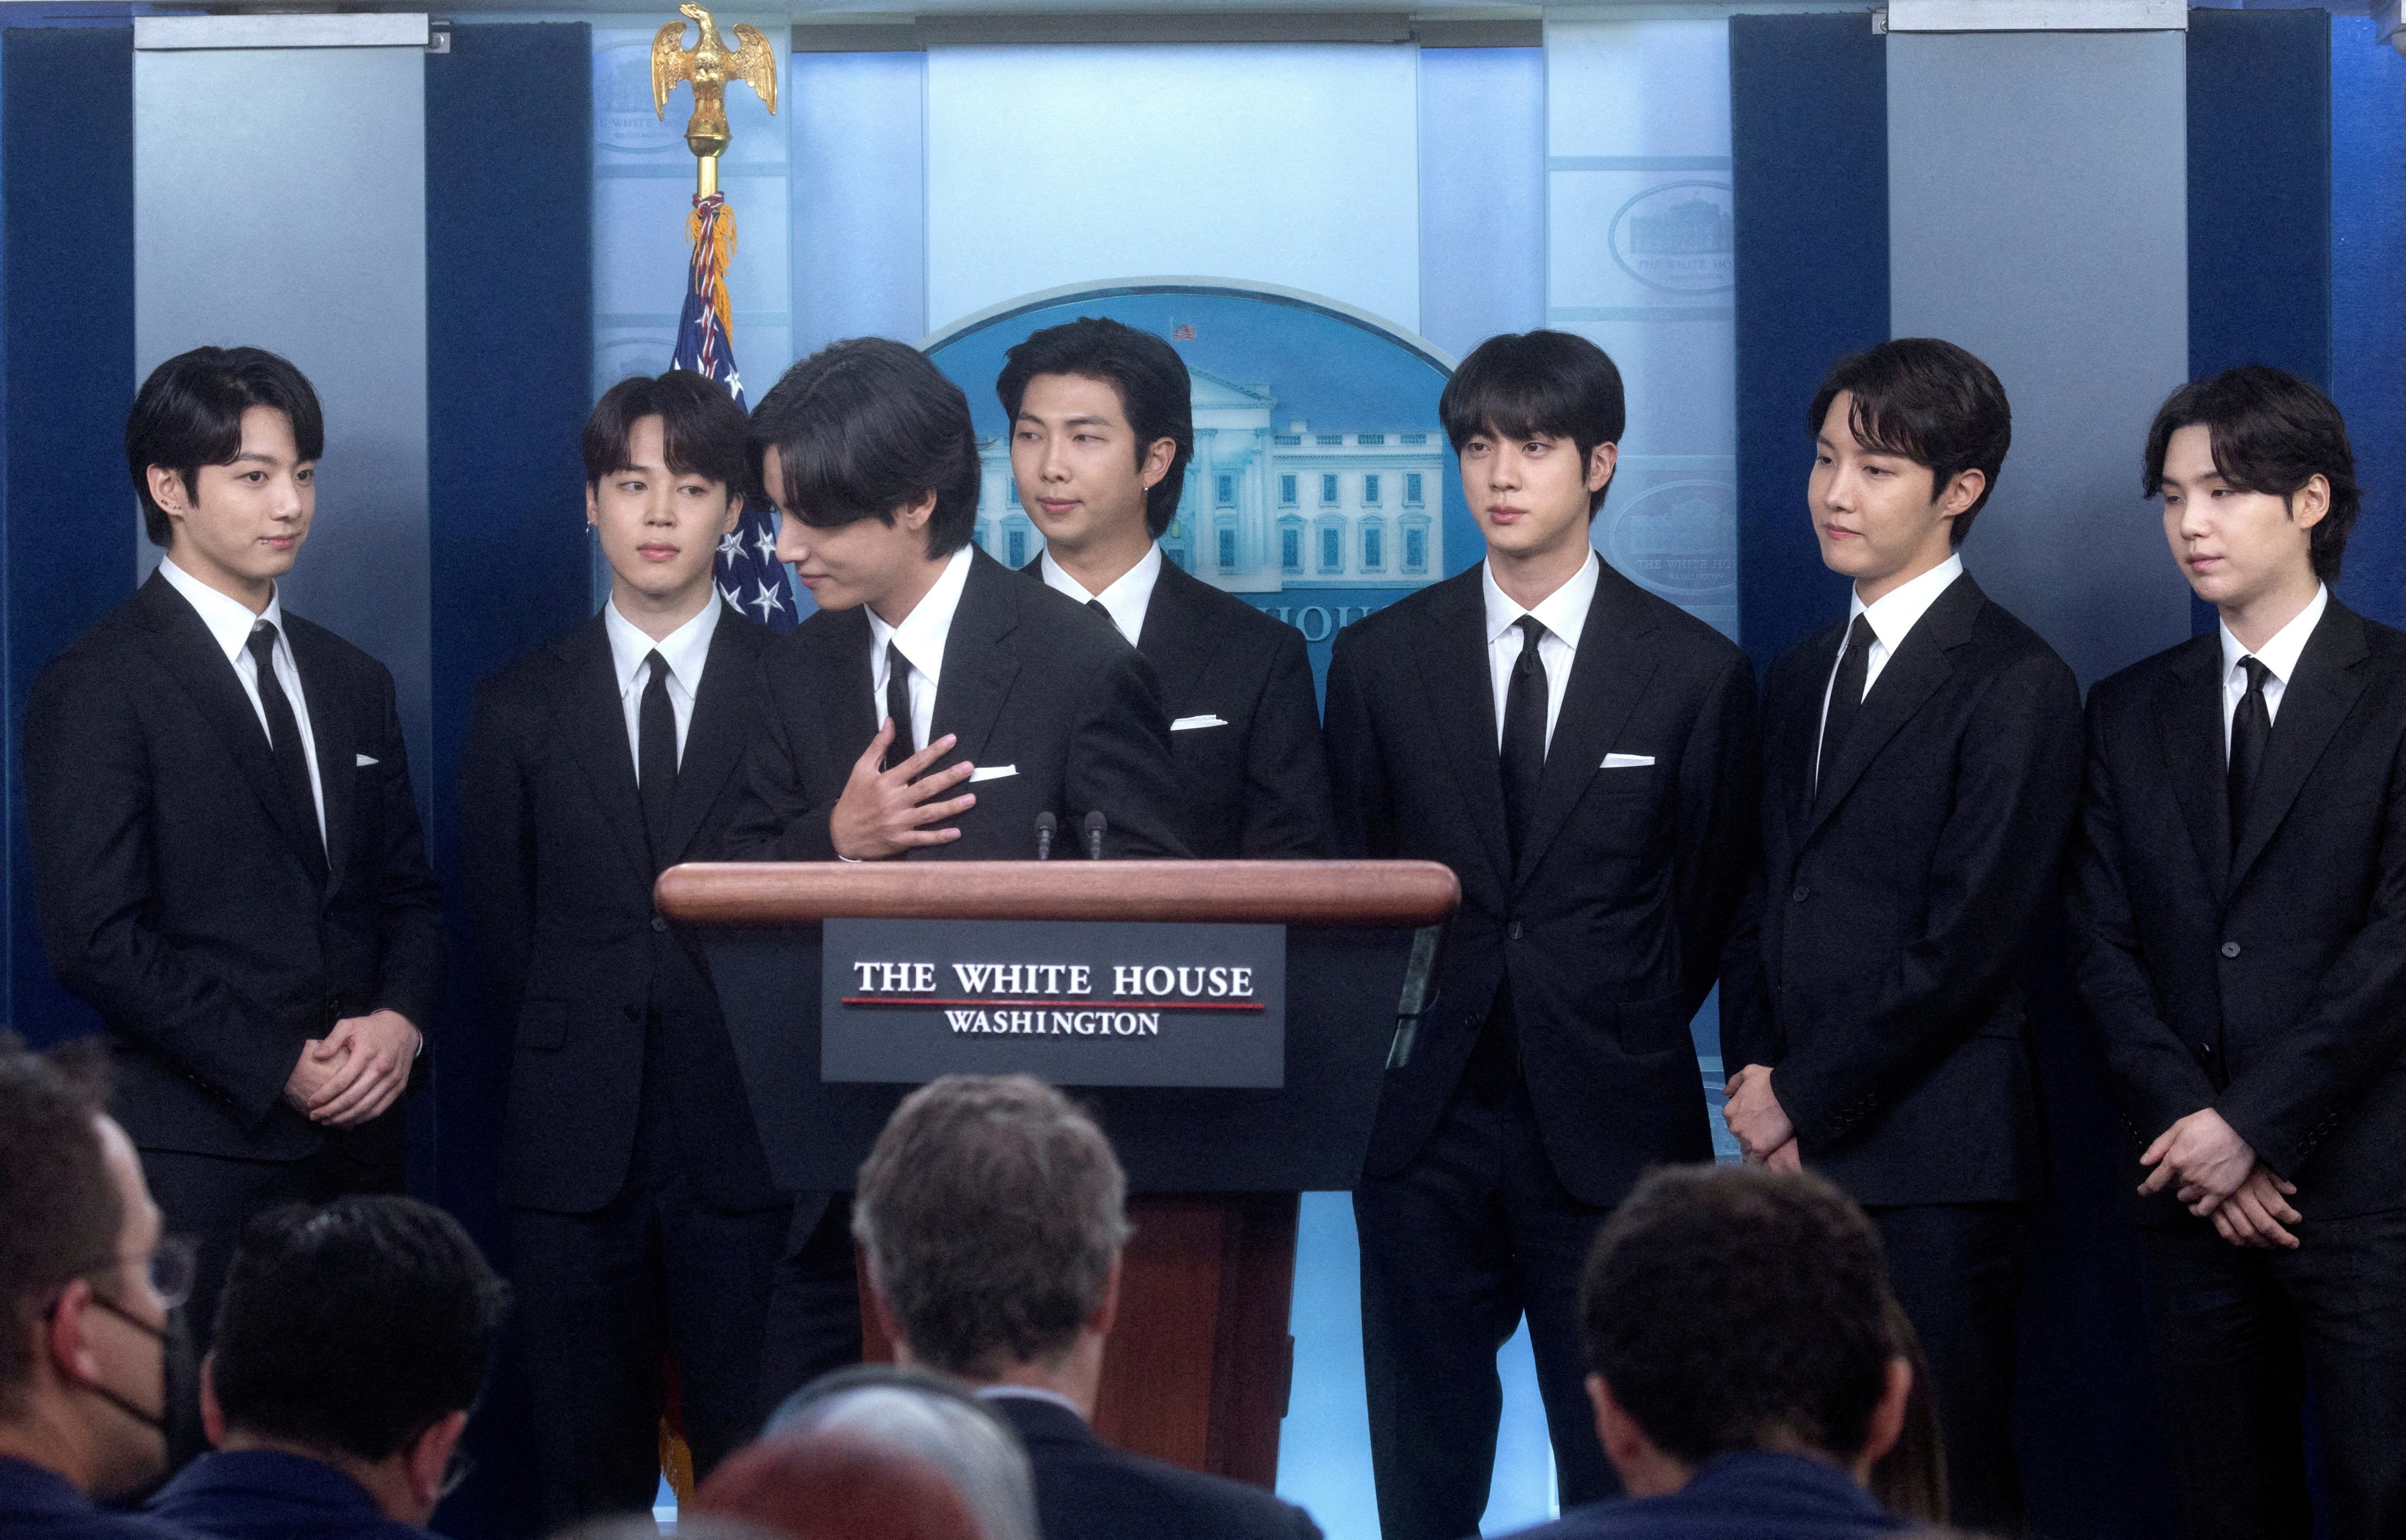 BTS makes statements against anti-Asian hate crimes at the White House on May 31, 2022. Photo: Reuters